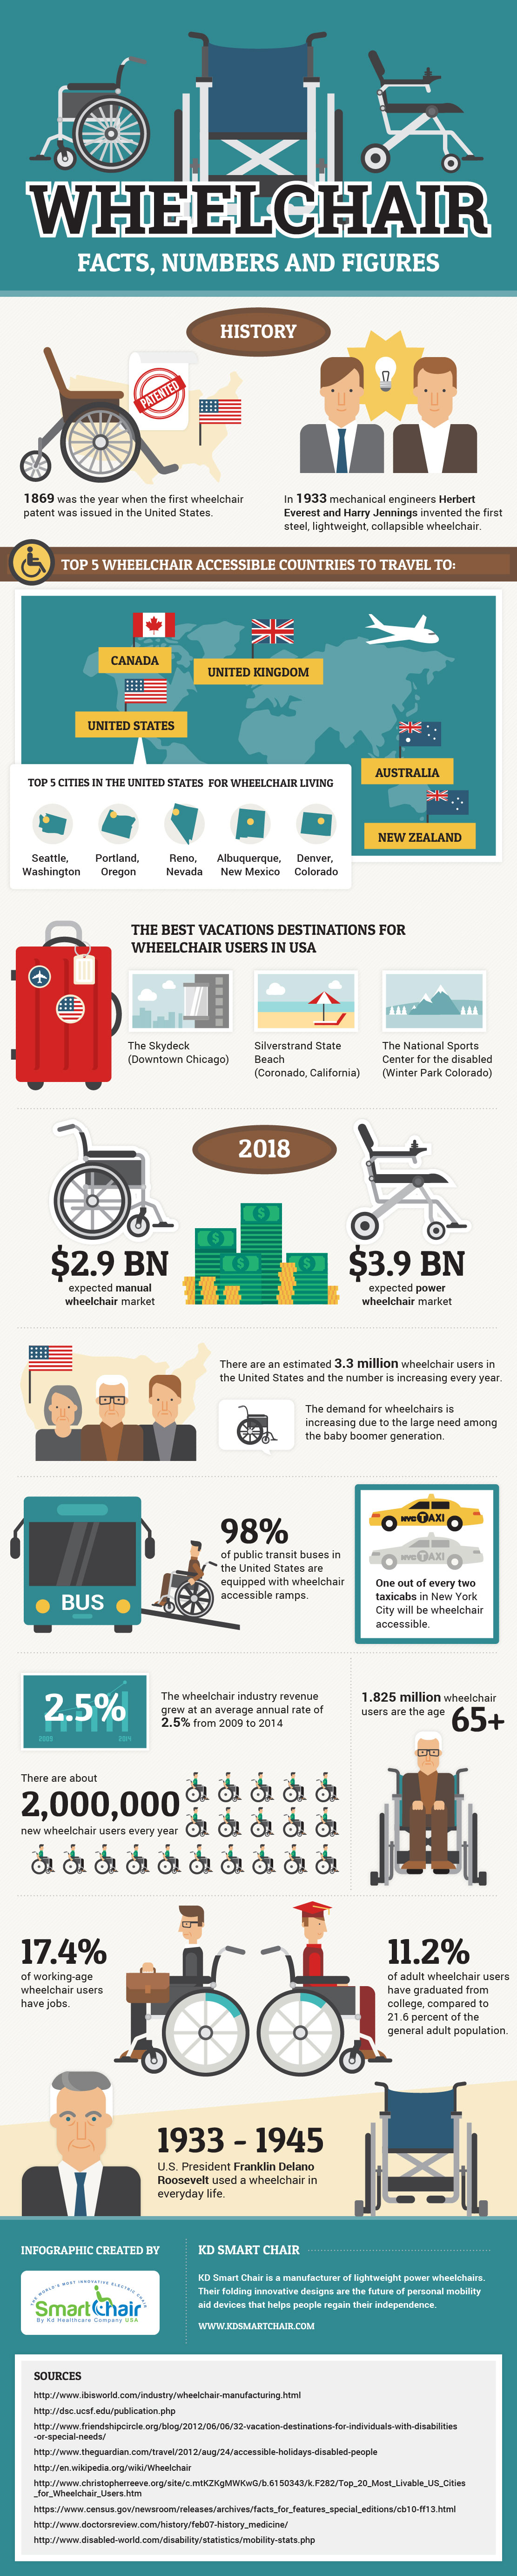 Wheelchair Facts, Numbers and Figures 